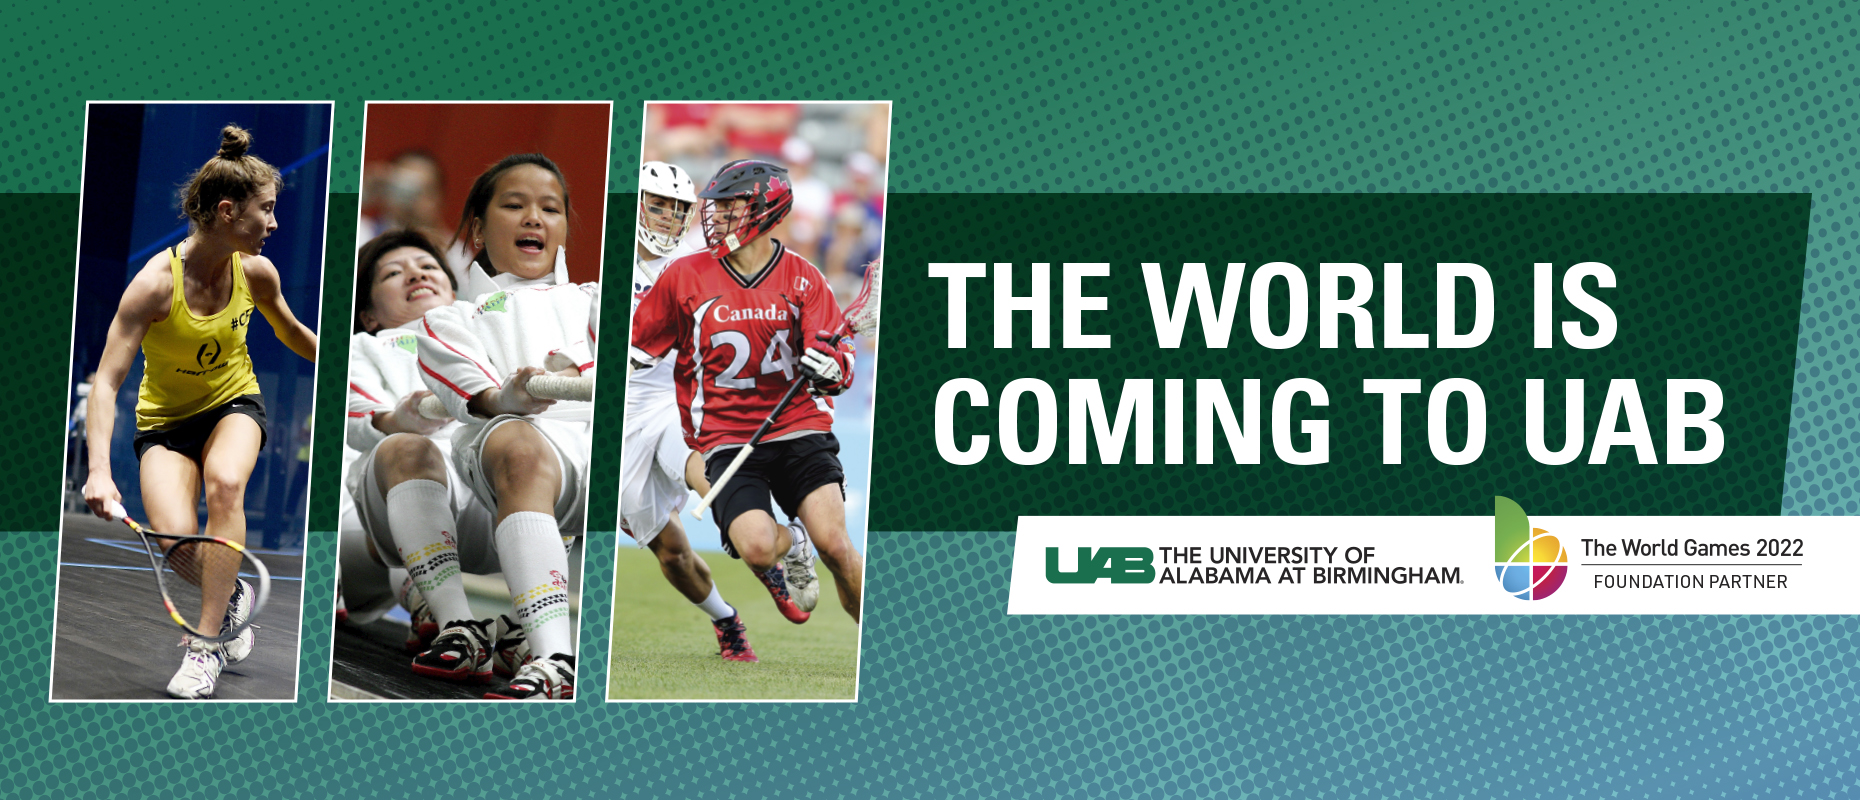 The world is coming to UAB. The World Games 2022.